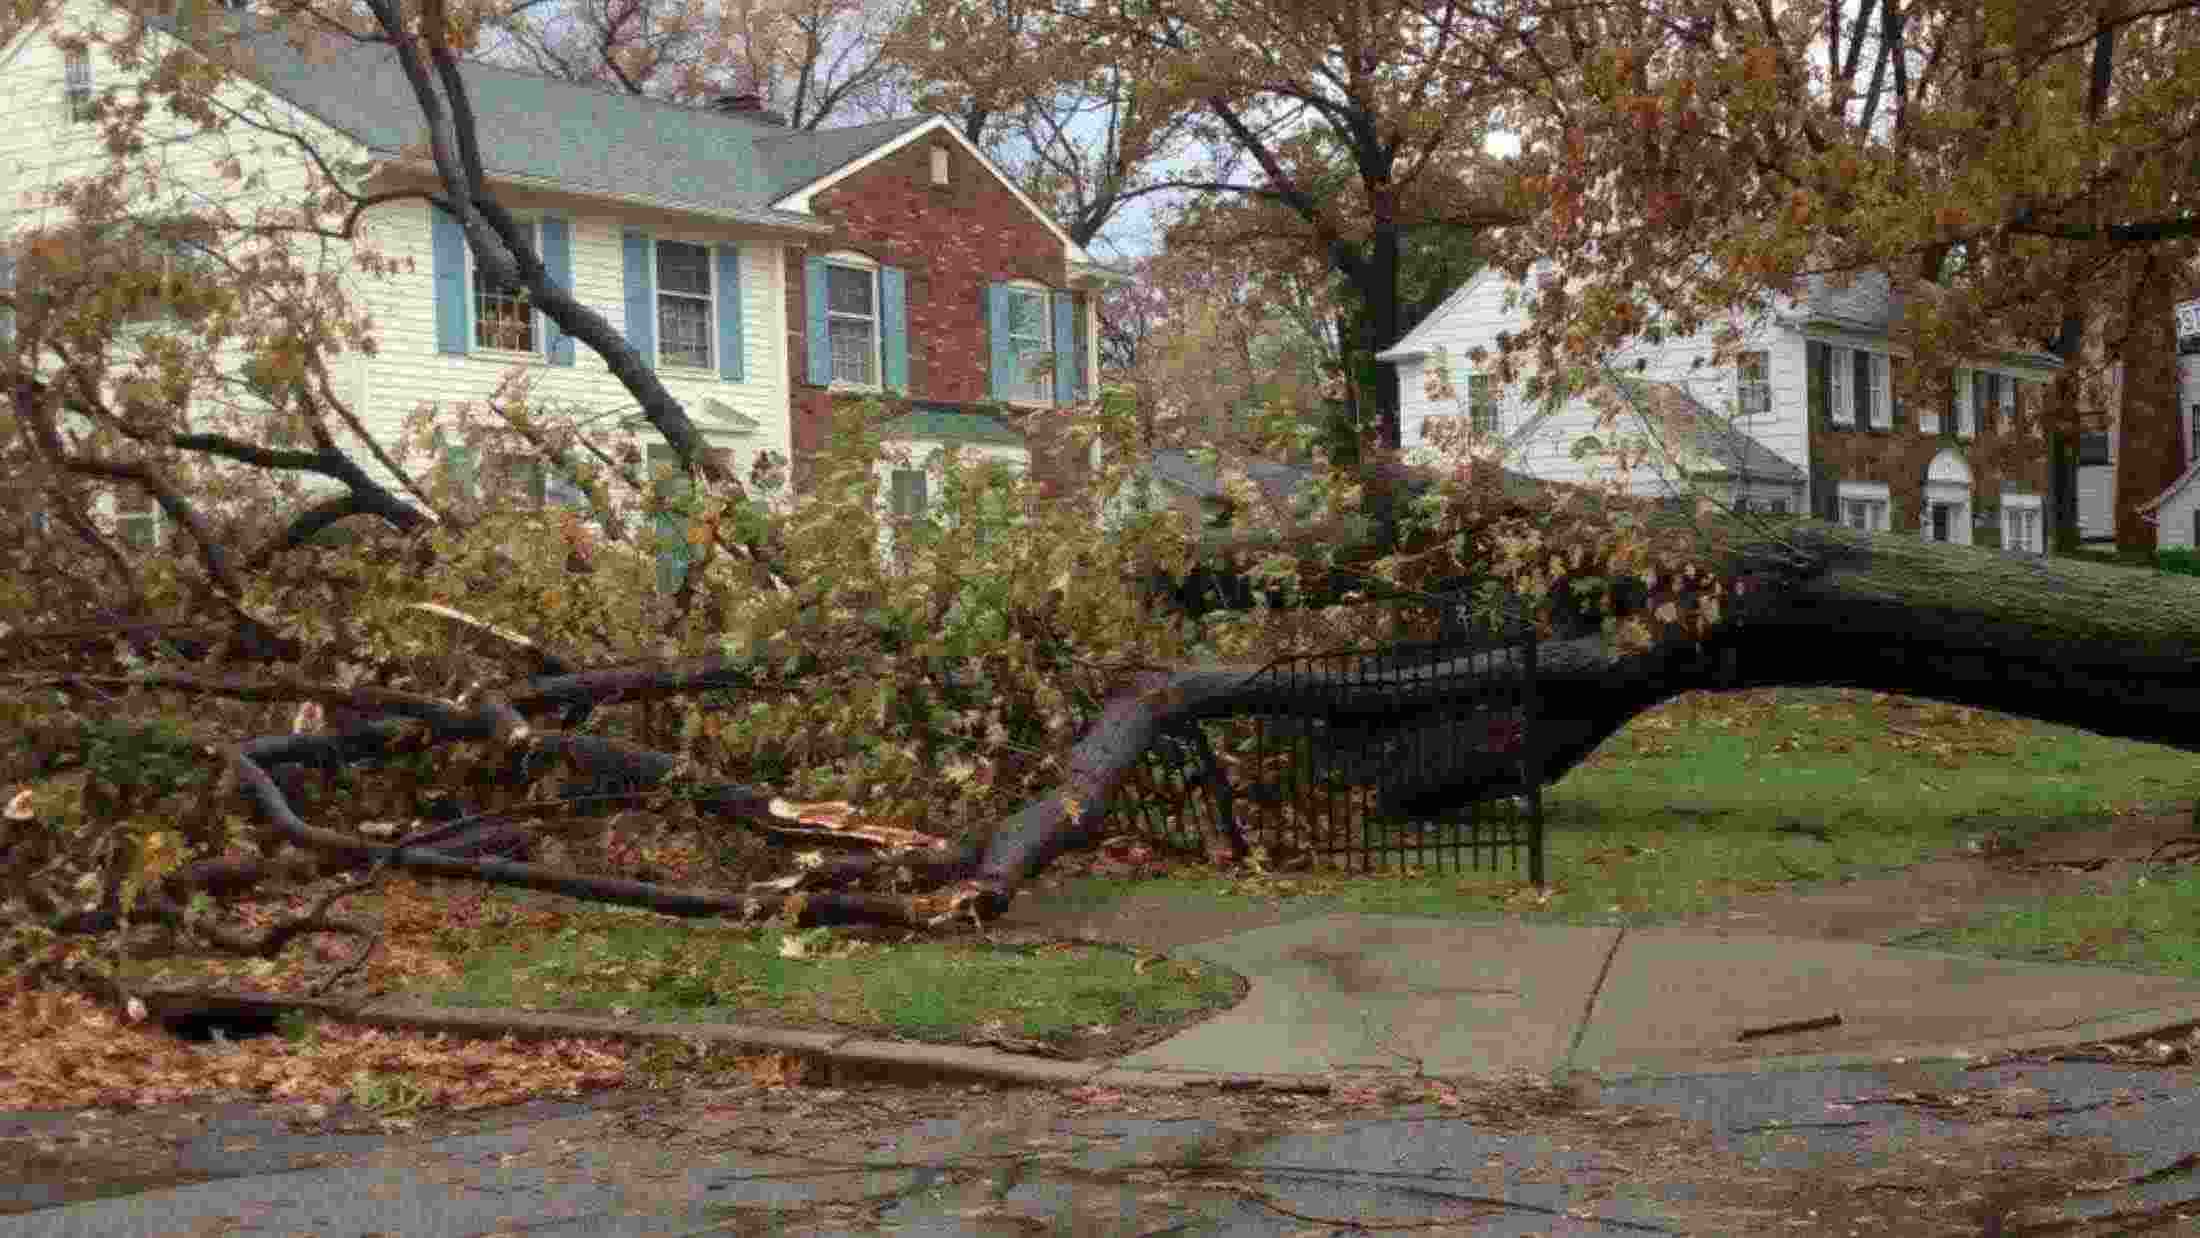 Fallen tree in front of a suburban house